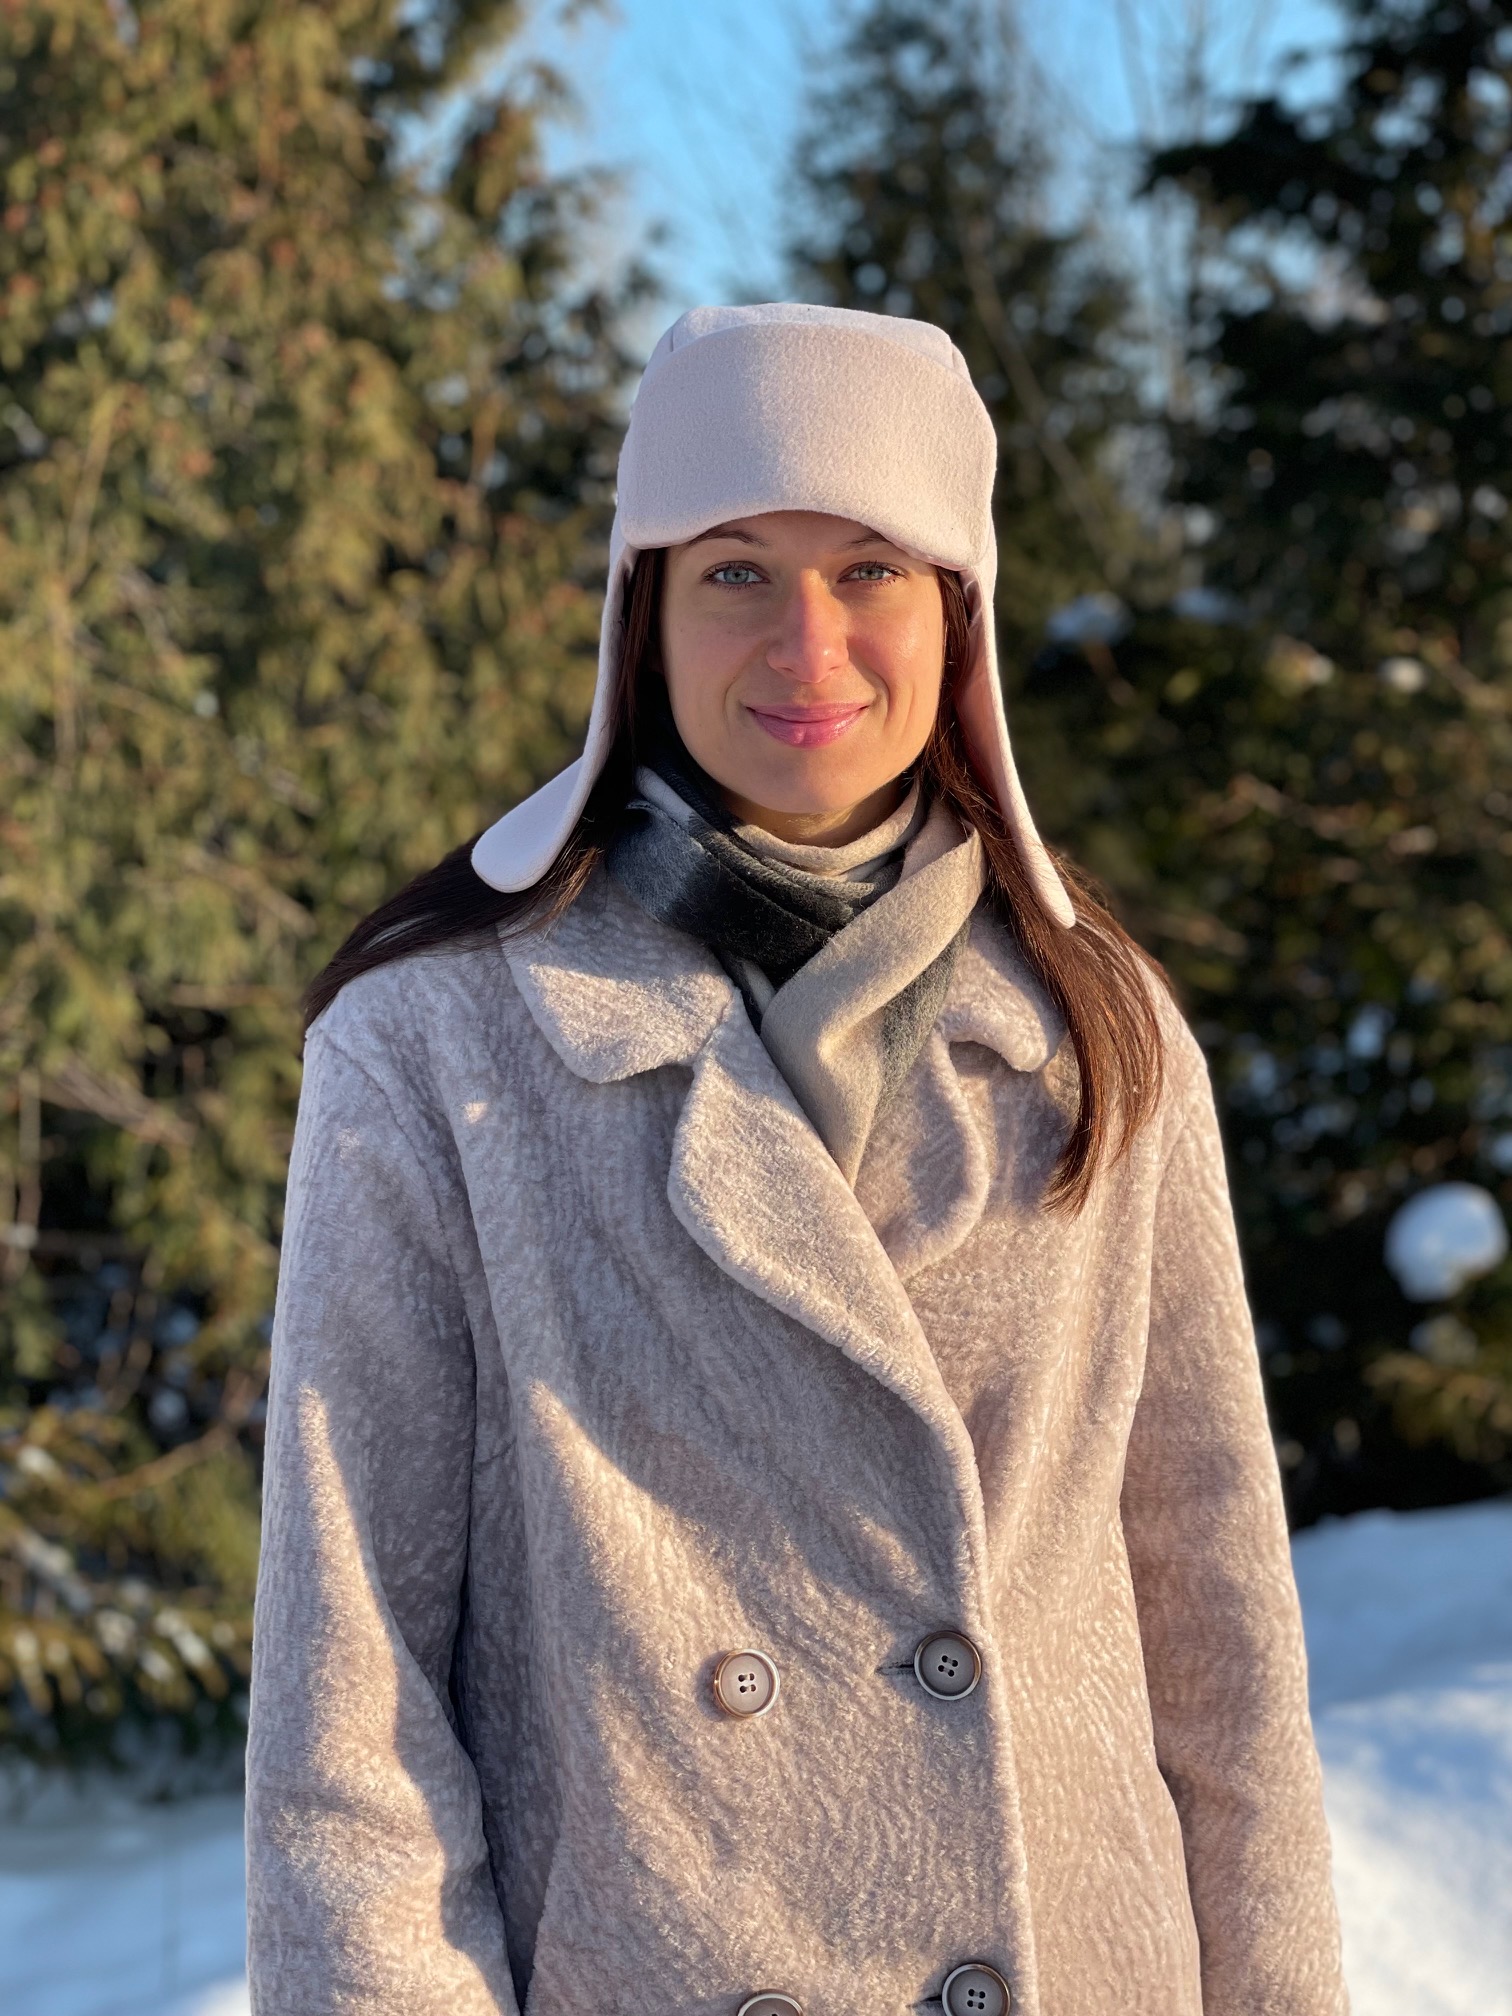 Women wearing the Unisex Aviator Hat sewing pattern from Kate’s Sewing Patterns on The Fold Line. A lined hat pattern made in coat, jacket or faux fur fabrics, featuring two side panels, central panel and front brim.